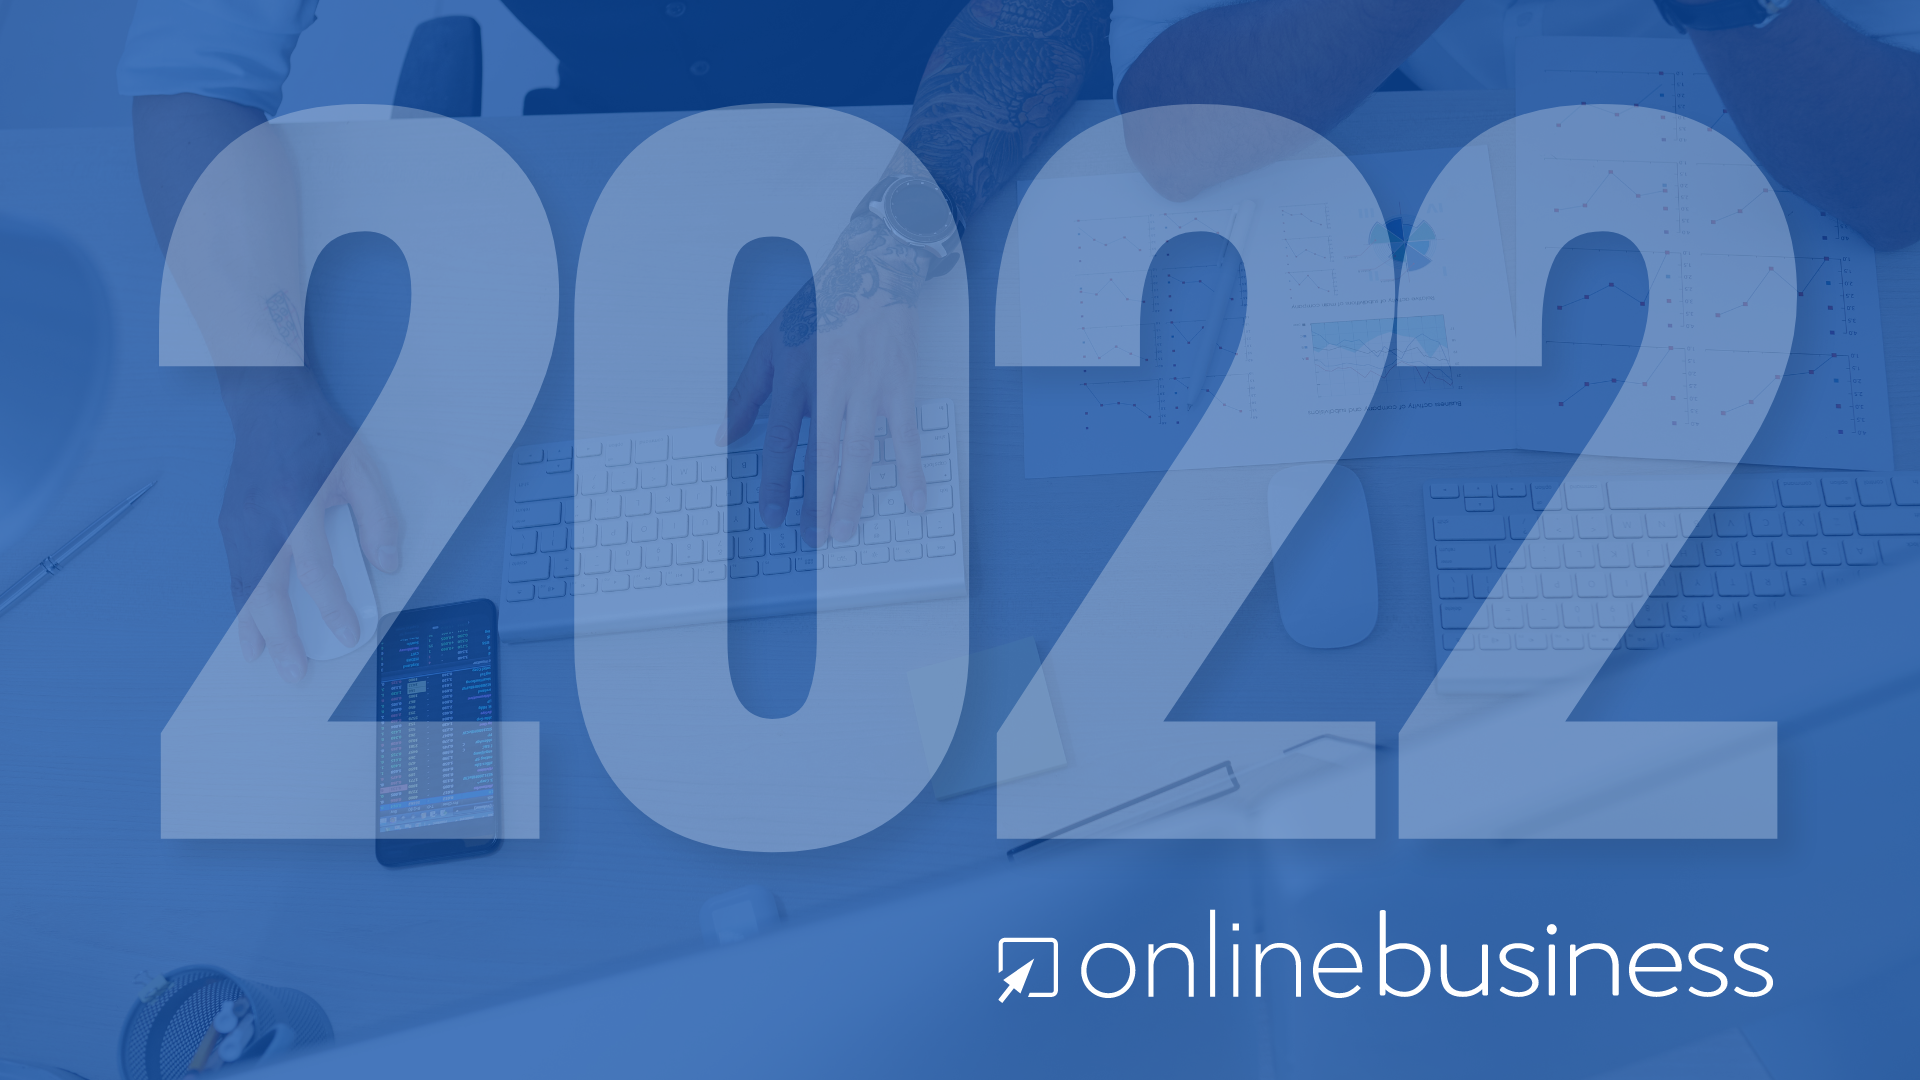 The Top Online Business Trends for 2022 Reports OnlineBusiness.com